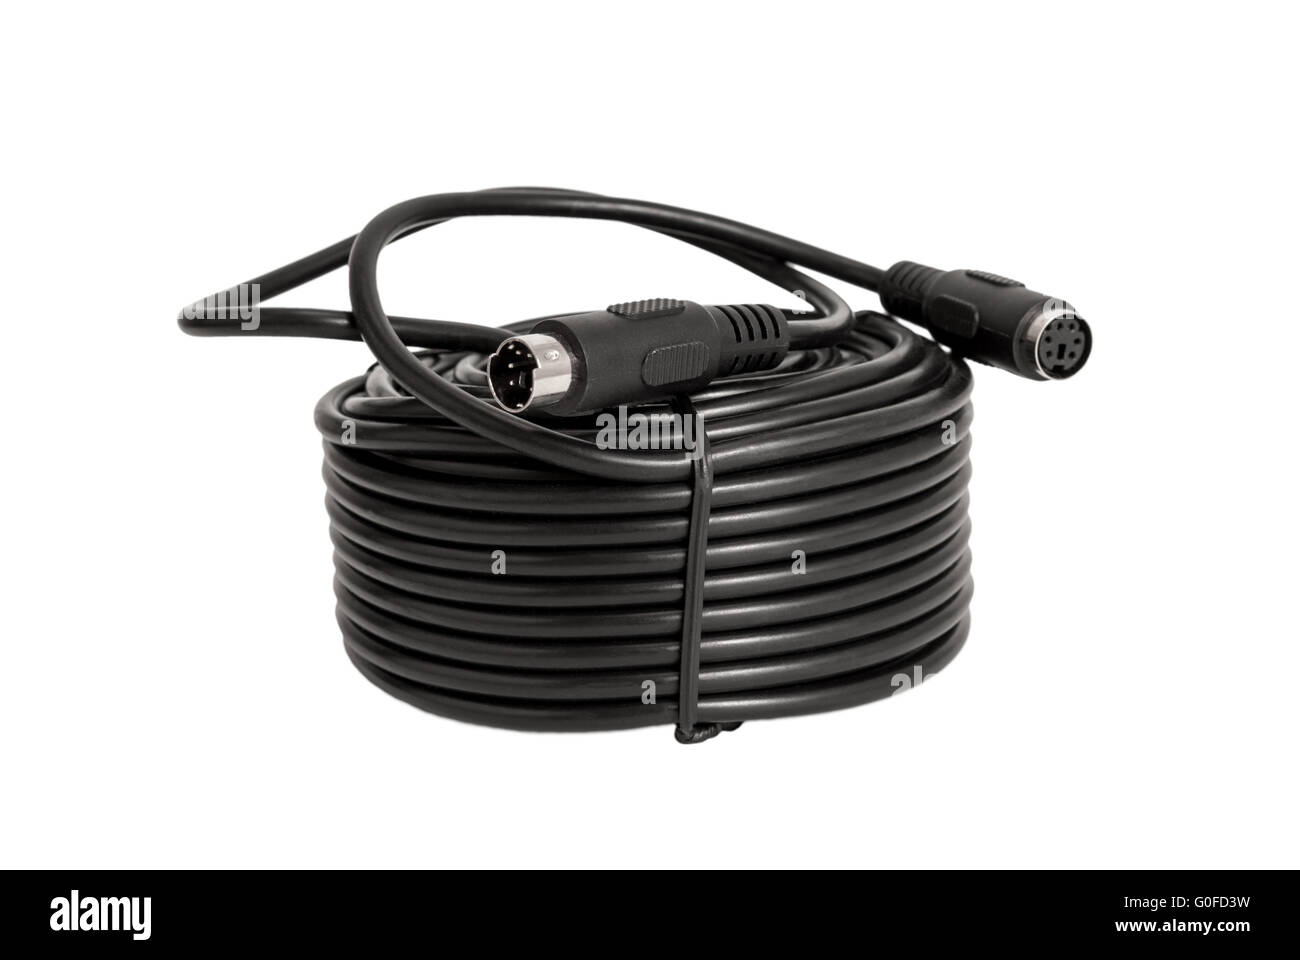 Electronic collection - coaxial cables with PS2 connectors for security cameras (CCTV) isolated Stock Photo